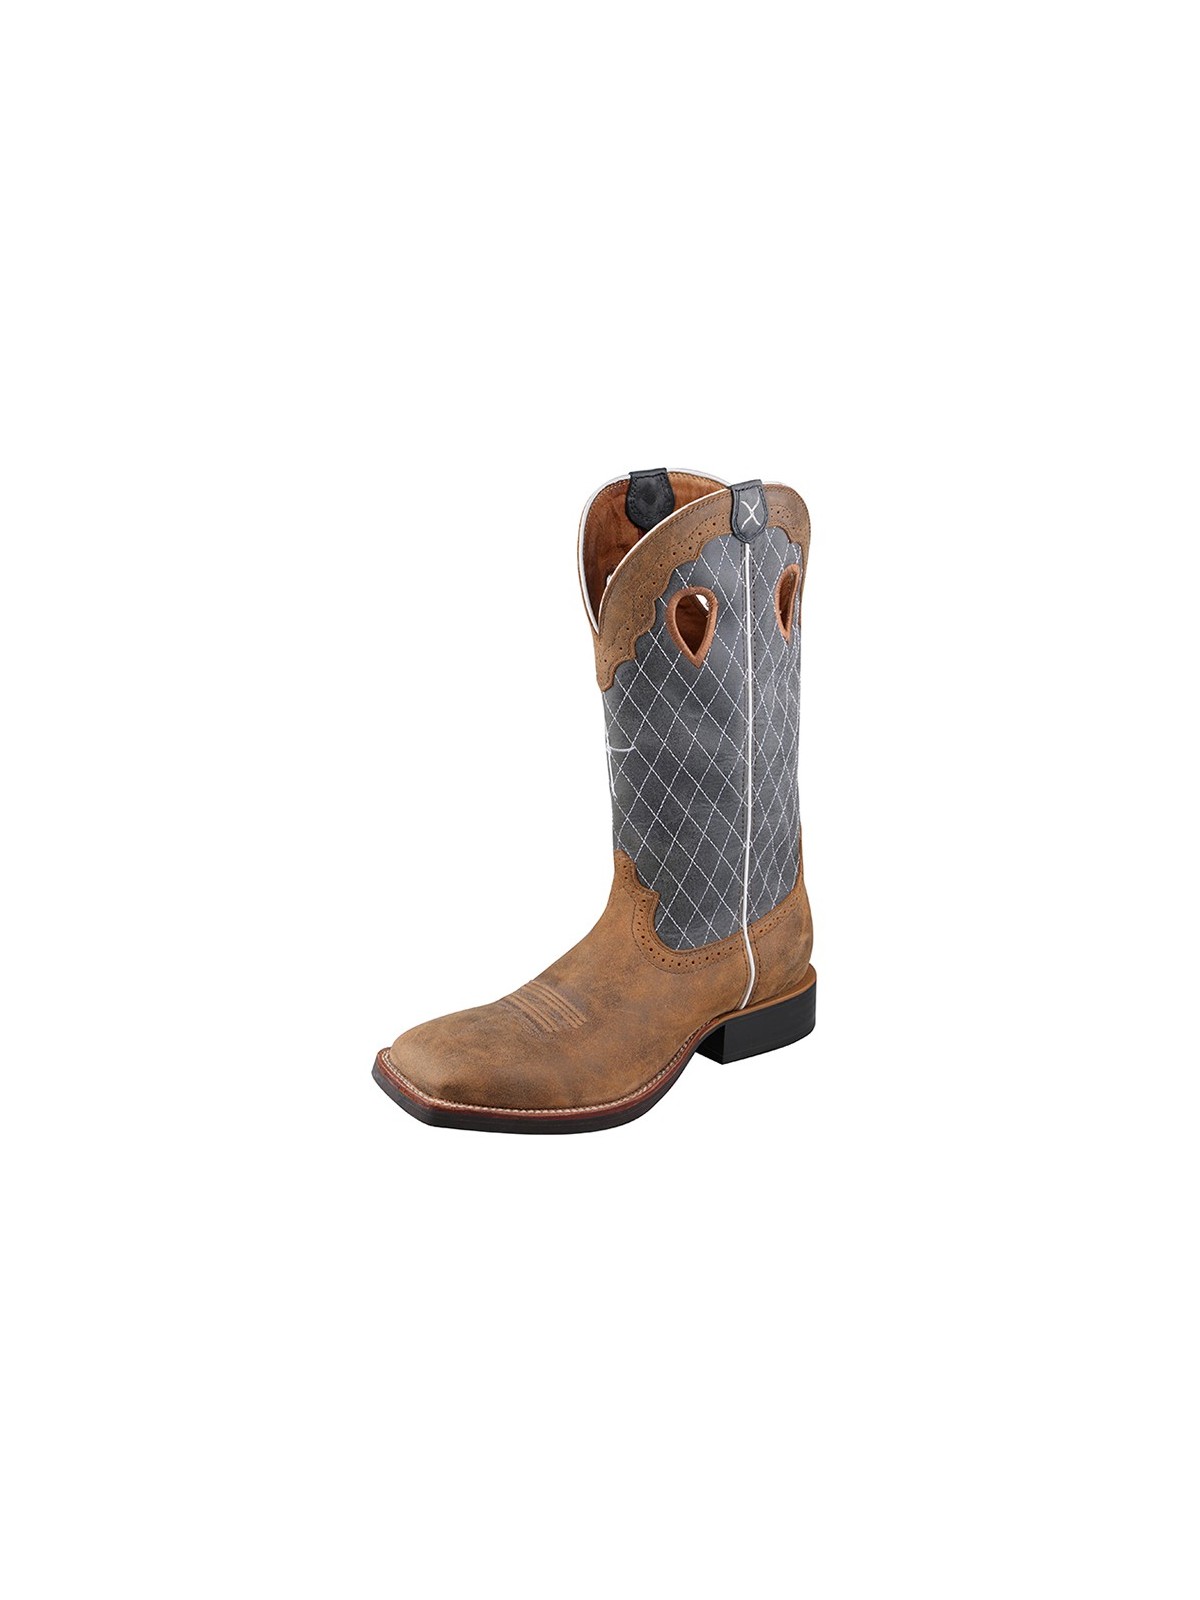 Twisted X Ruff Stock Boot MRS0027 western boots blue/brown